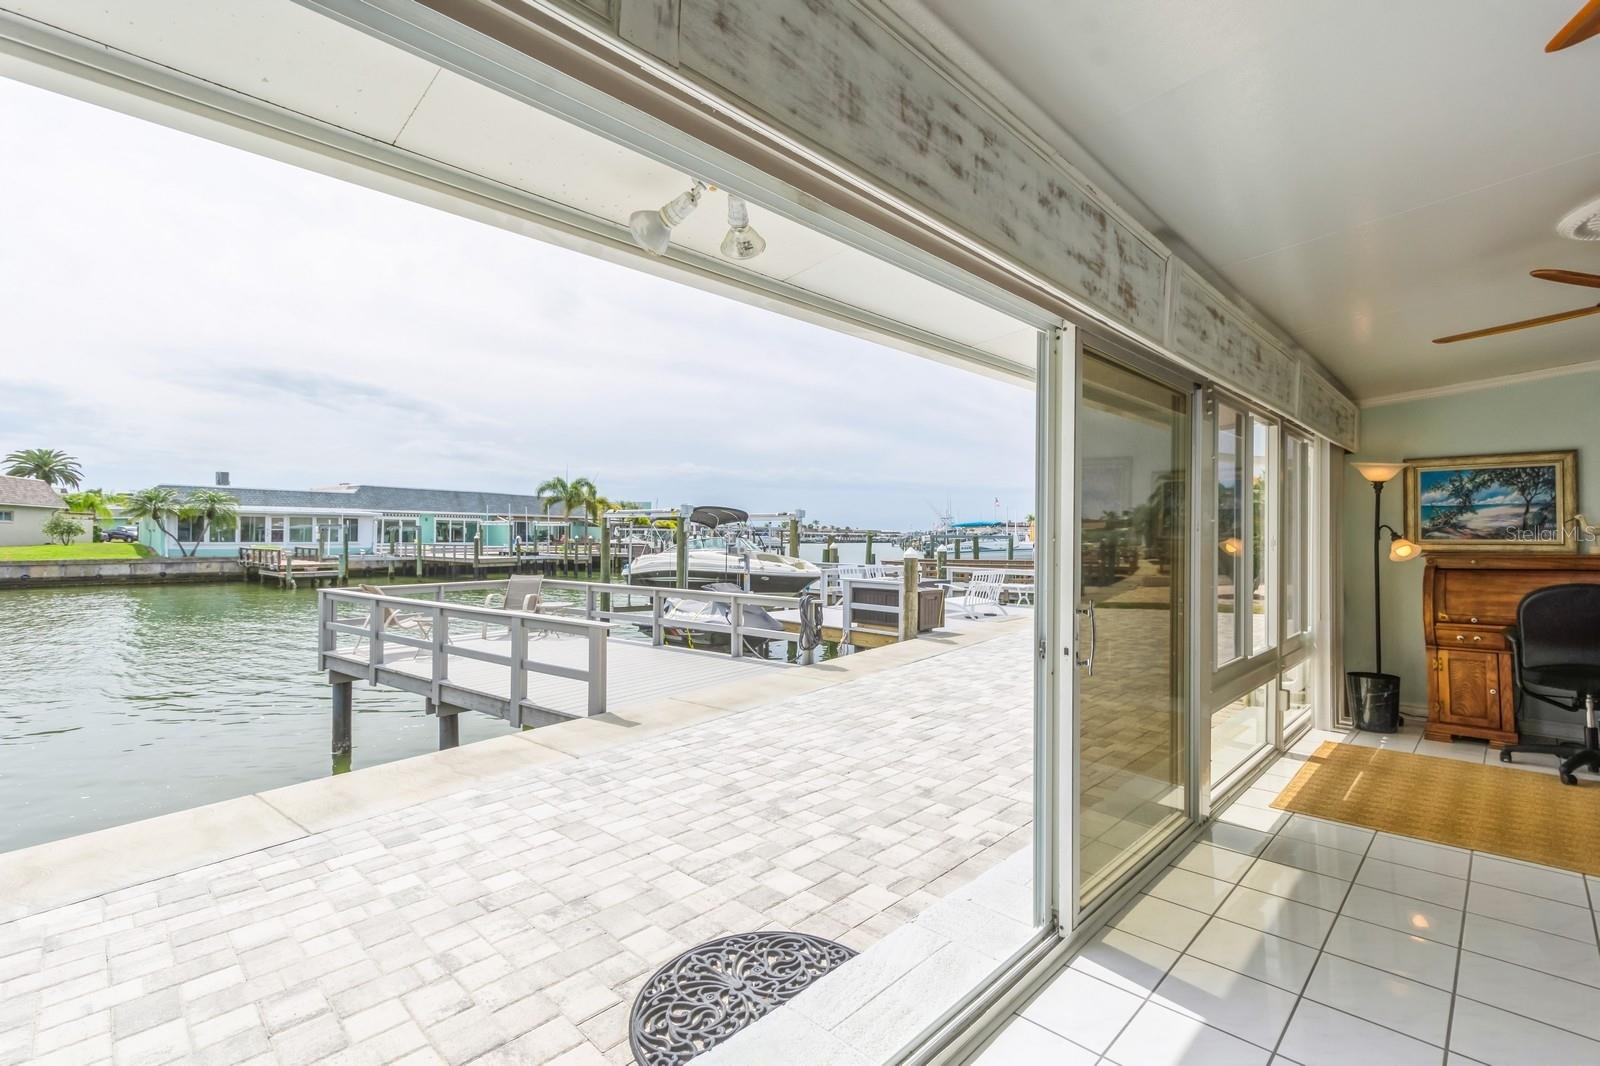 Sliding doors open up to your back yard patio and dock